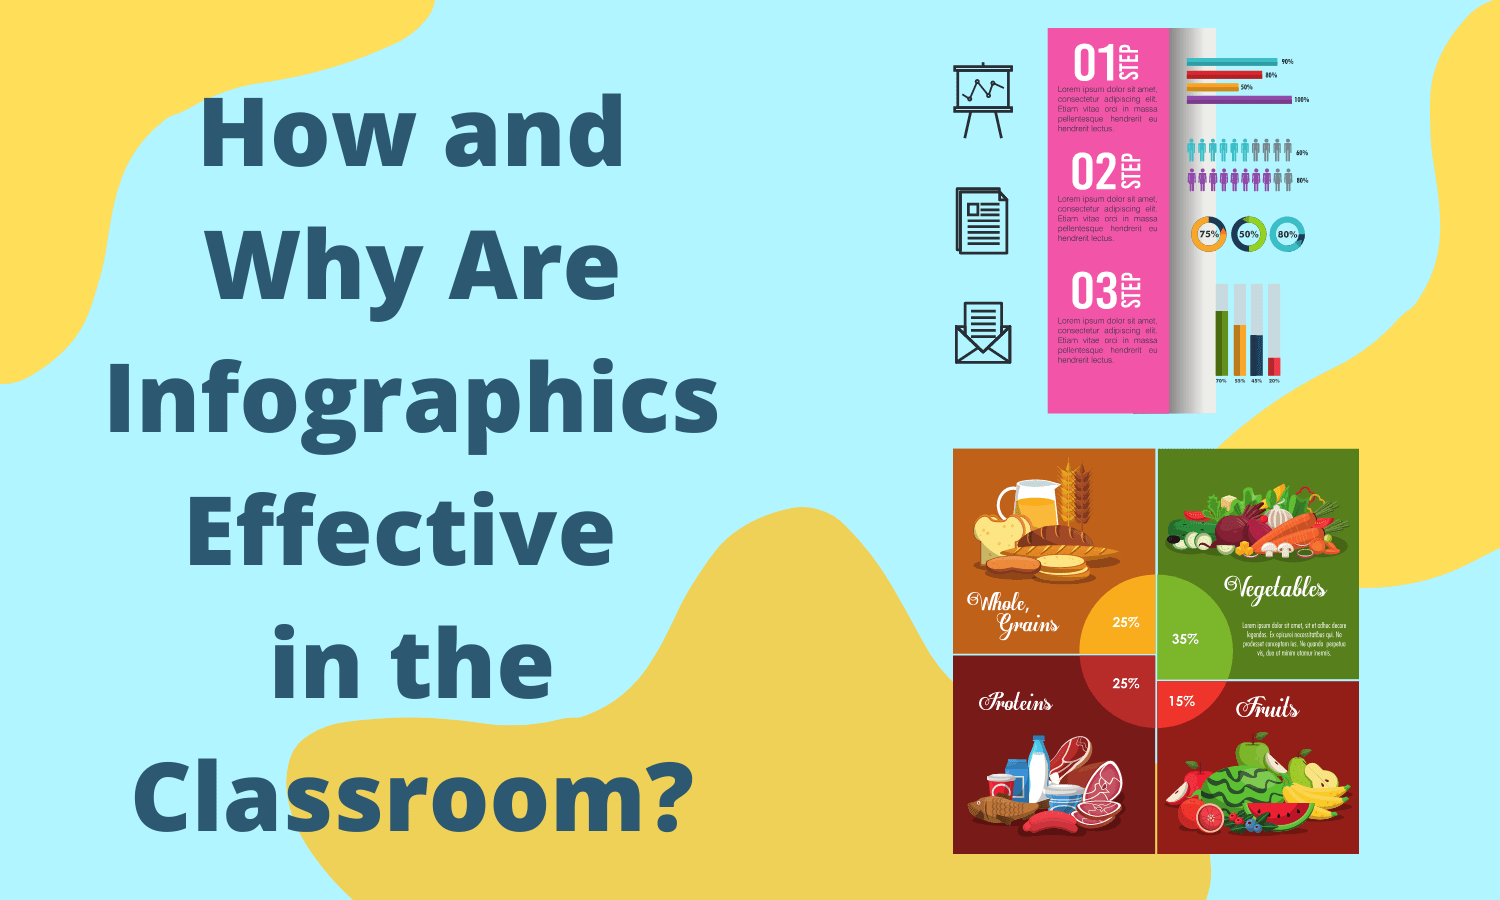 How and why are infographics effective in the classroom